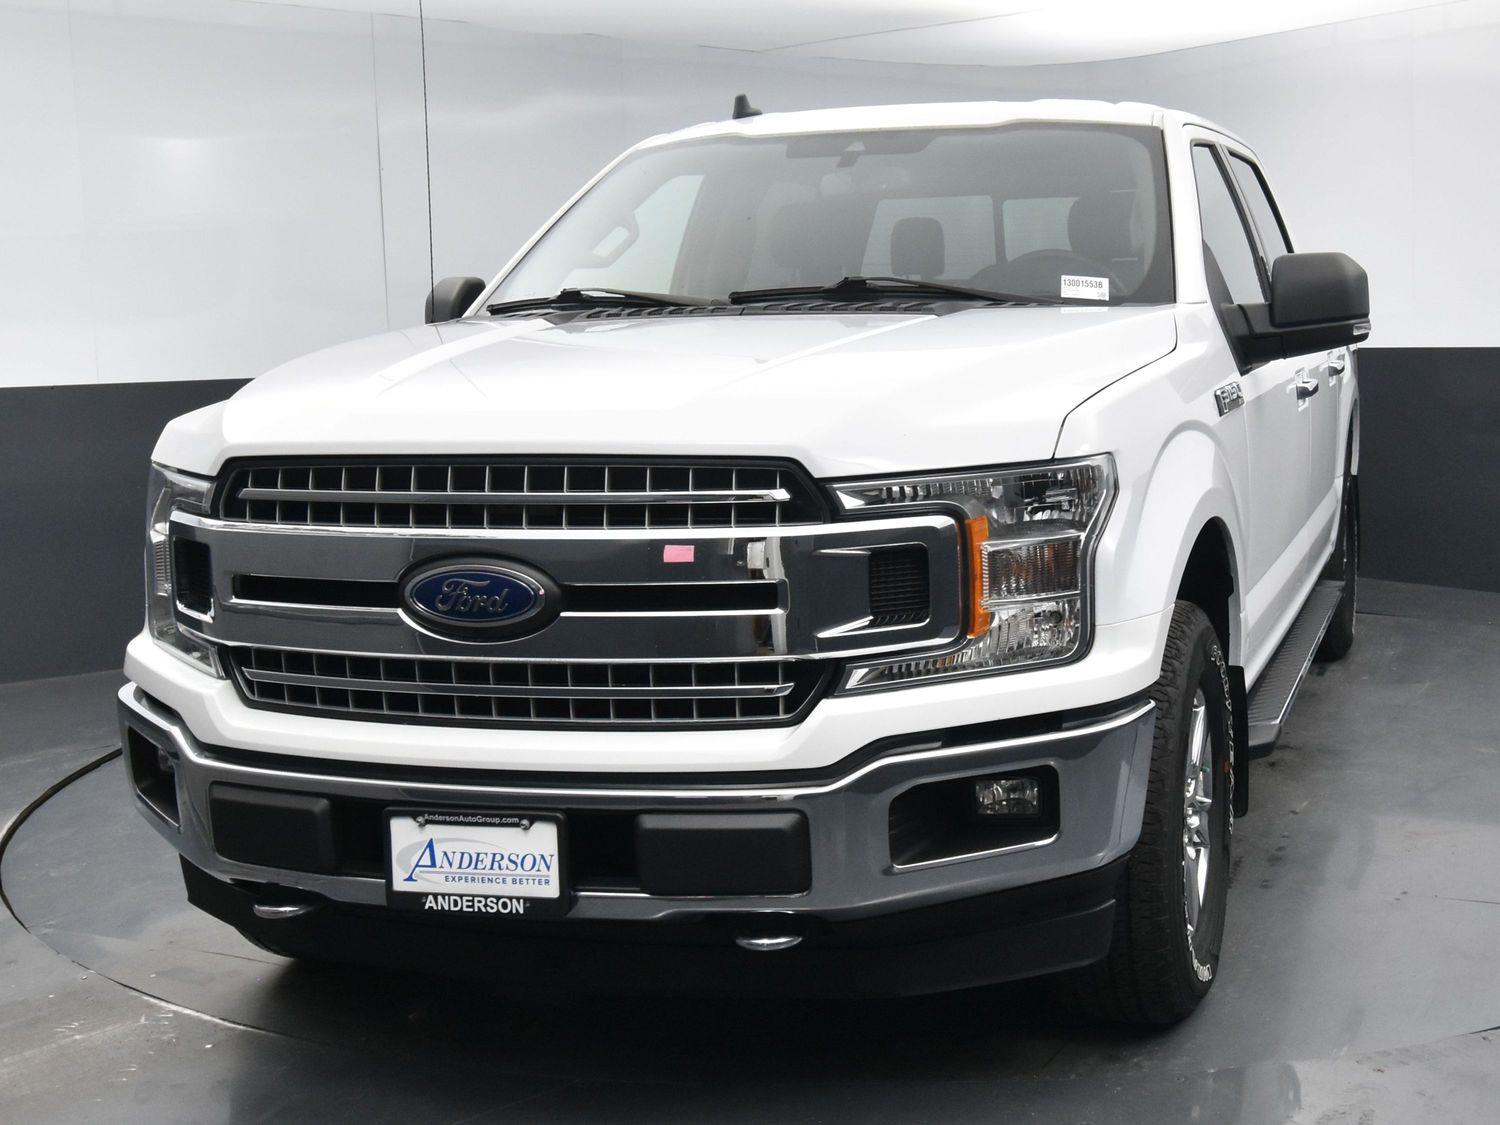 Used 2019 Ford F-150 XLT Crew Cab Truck for sale in Grand Island NE